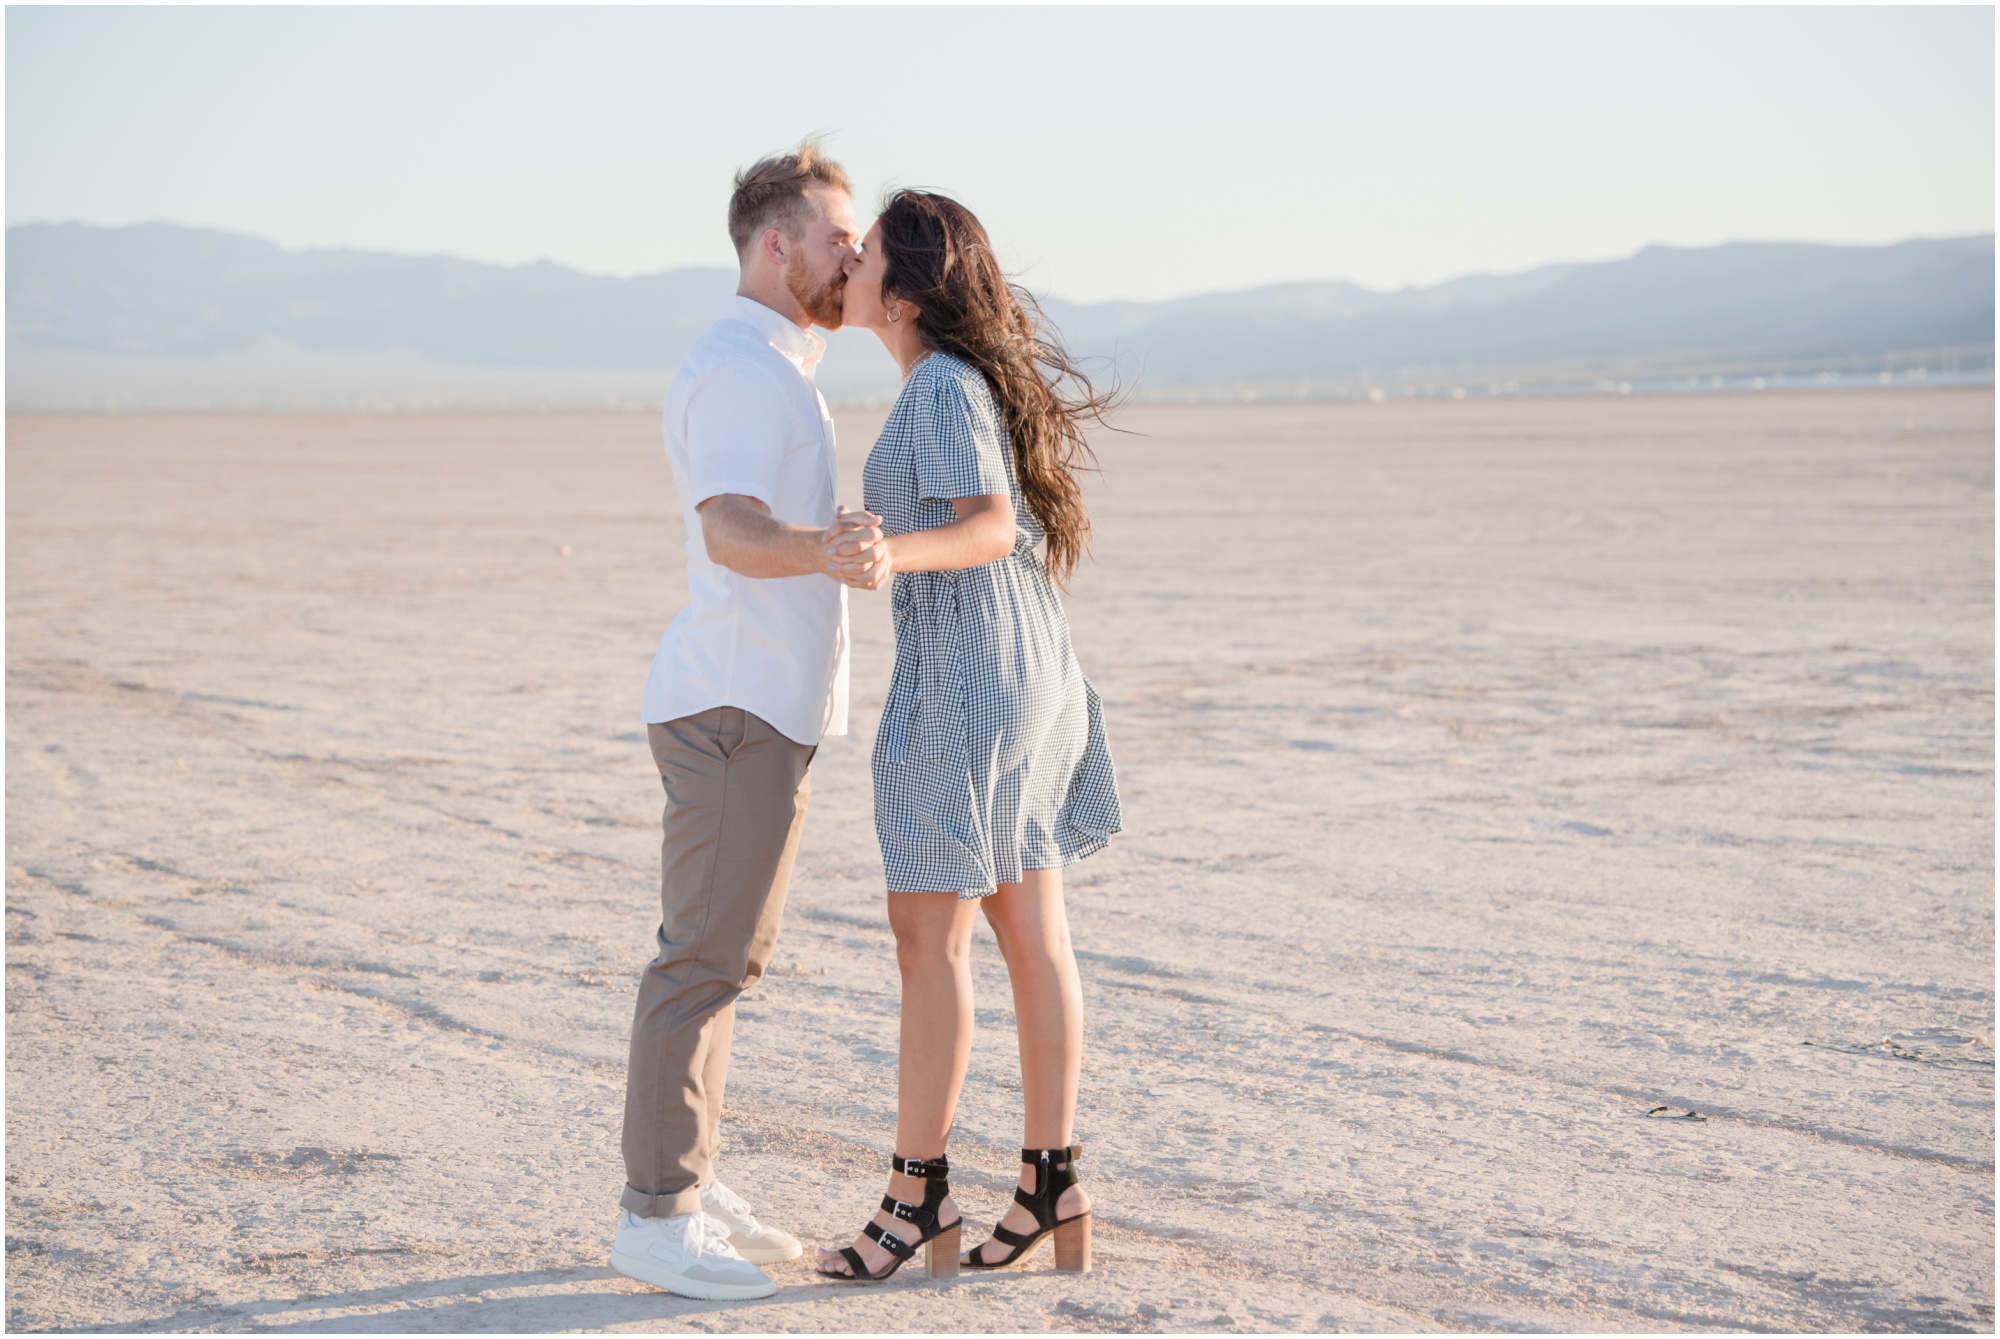 Casual Couple in the Desert 